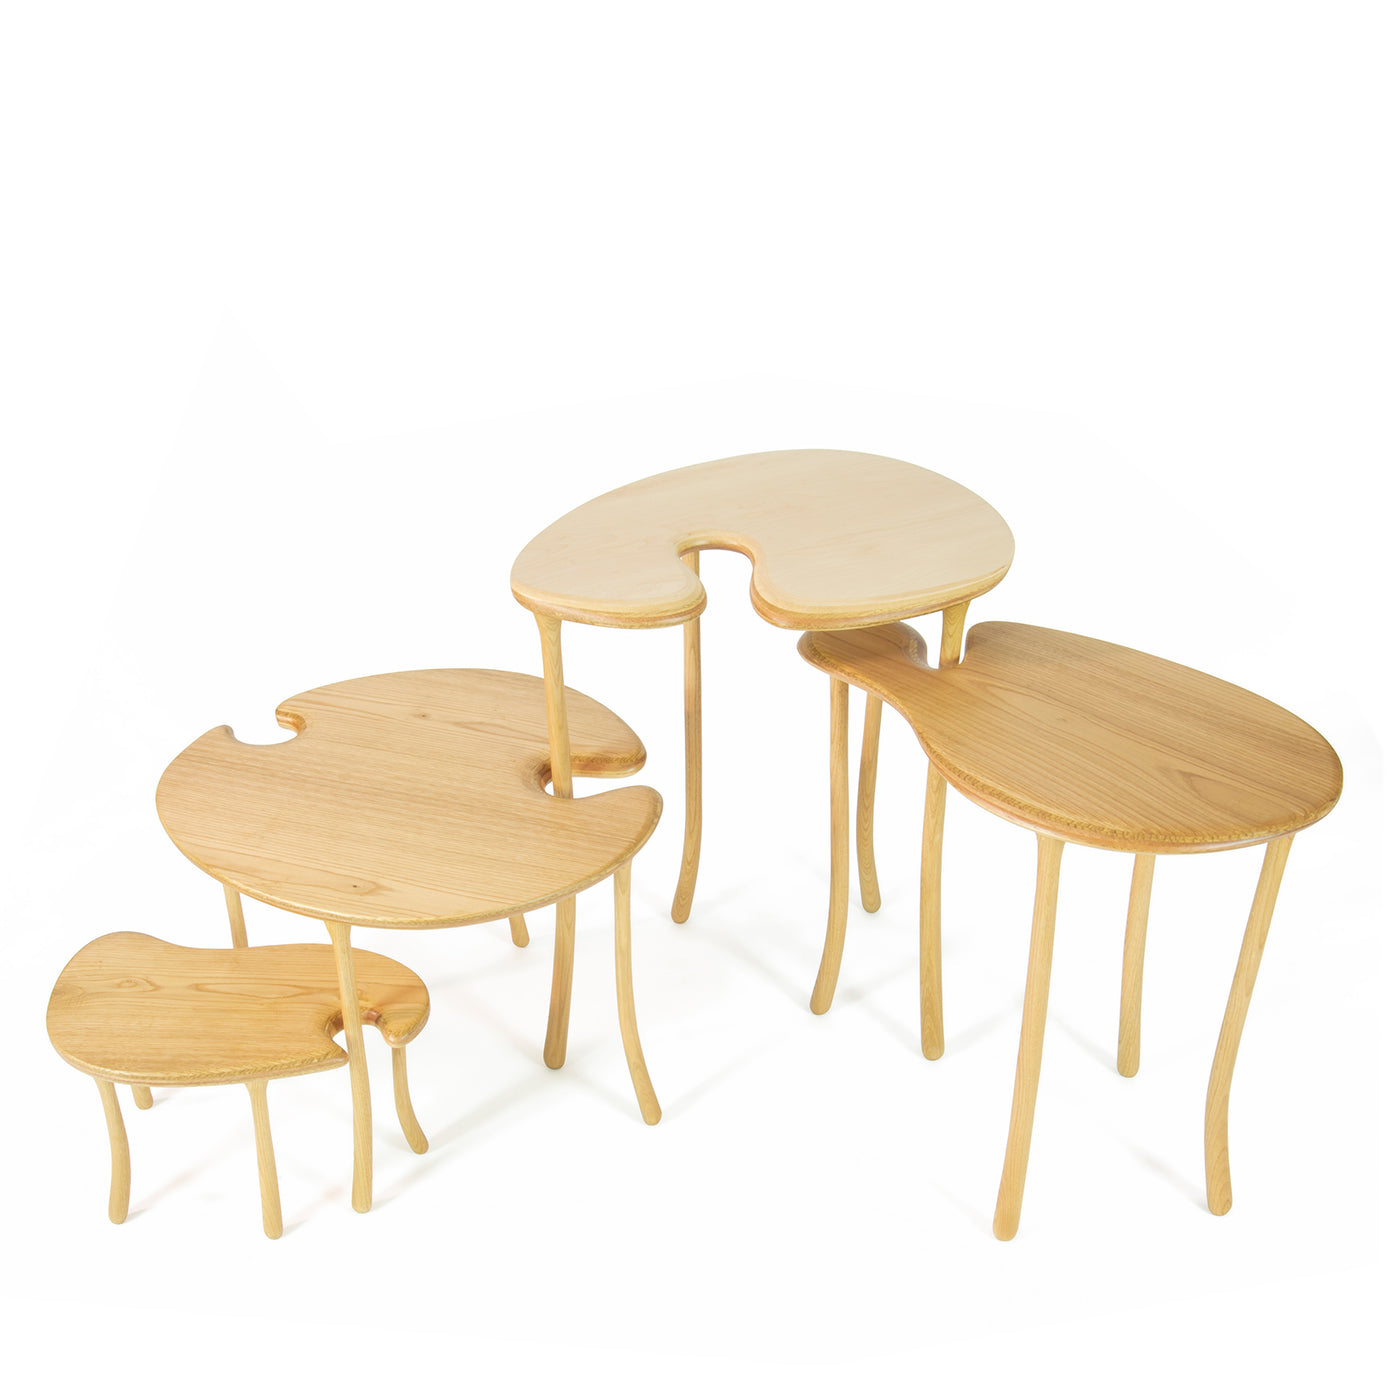 Tavo A1 Modular Set of 4 Coffee Tables Limited Edition - Alternative view 1